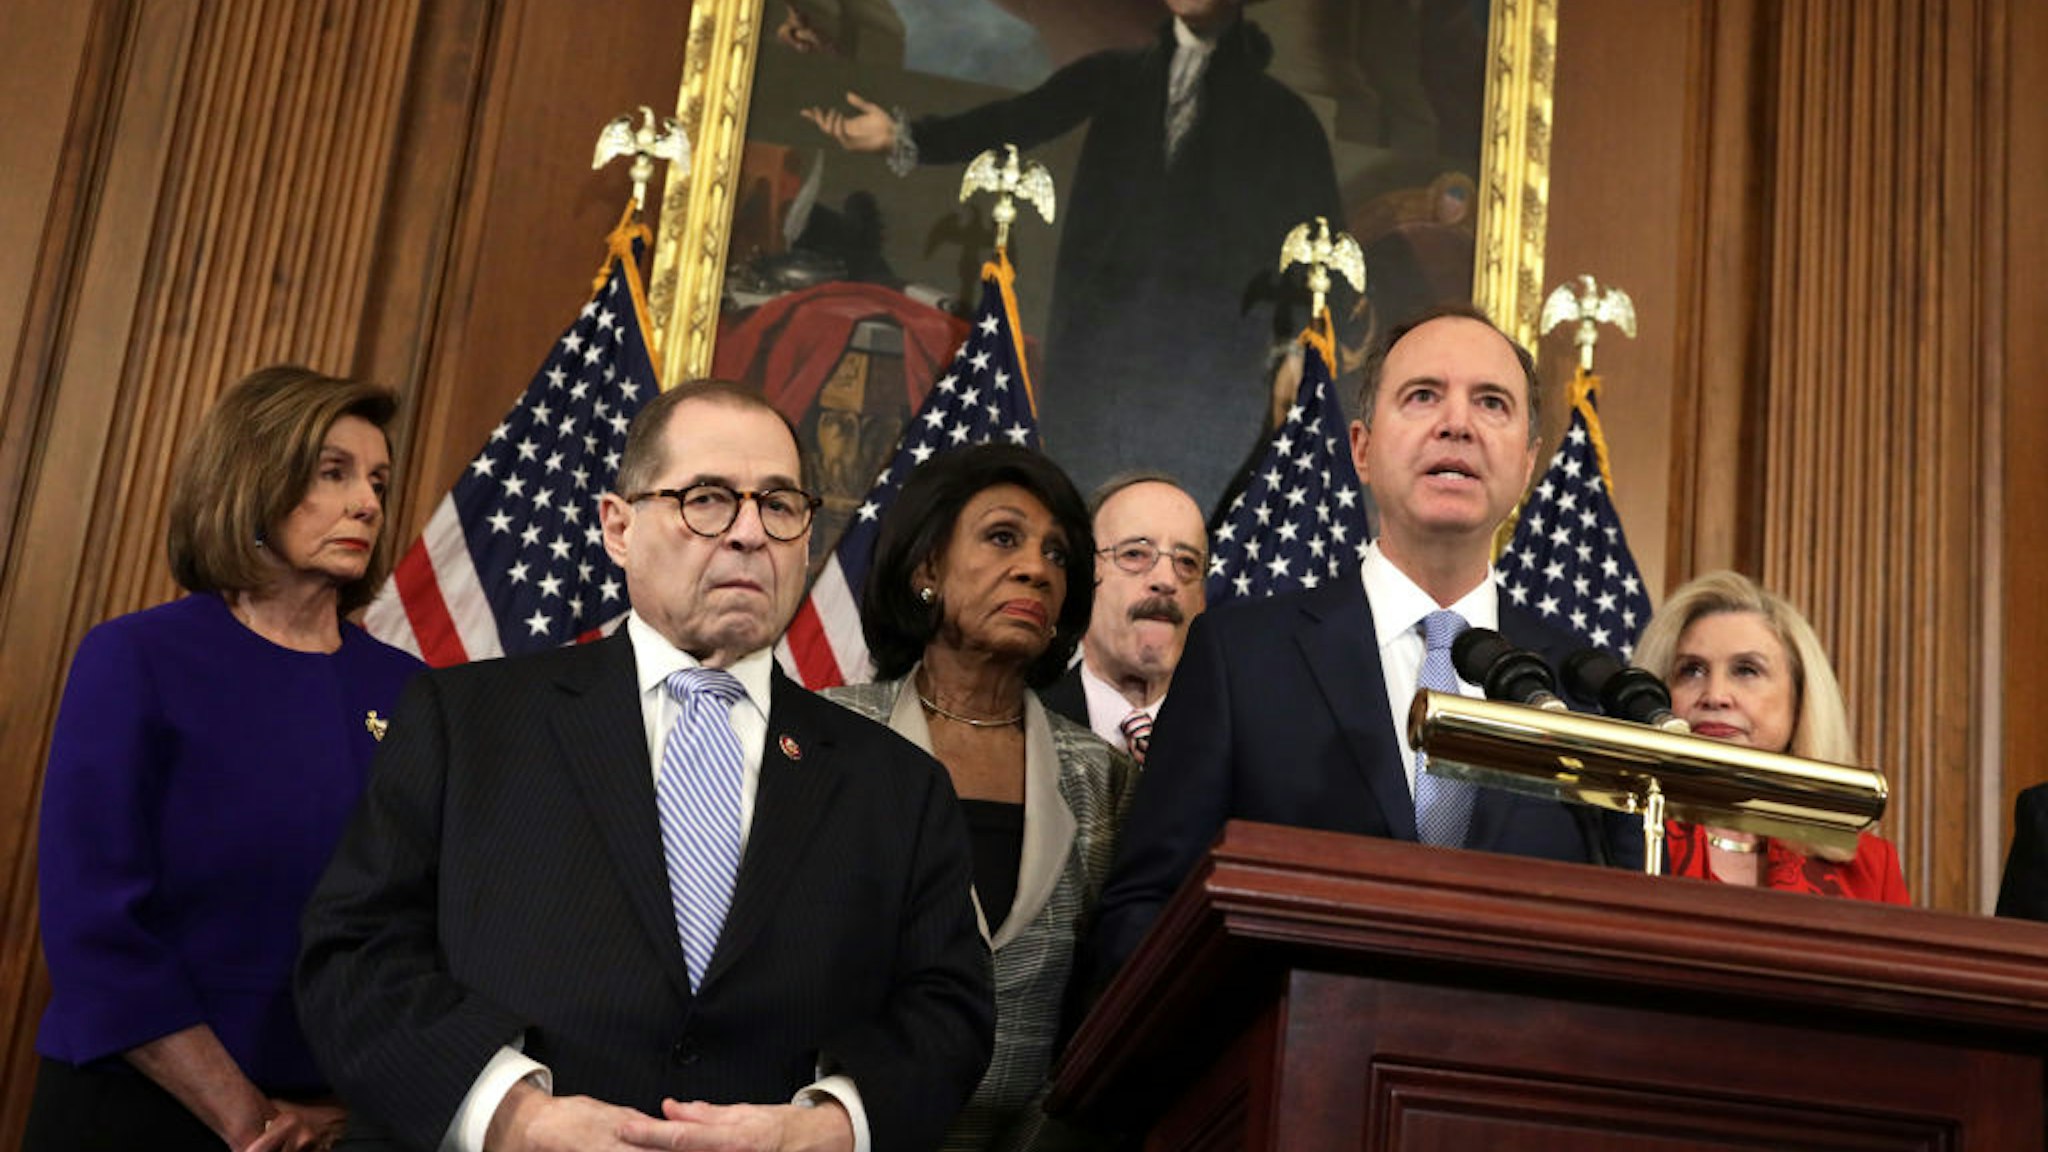 WASHINGTON, DC - DECEMBER 10: Chairman of House Intelligence Committee Rep. Adam Schiff (D-CA) (2nd-R) speaks as (L-R) Speaker of the House Rep. Nancy Pelosi (D-CA), Chairman of House Judiciary Committee Rep. Jerry Nadler (D-NY), Chairwoman of House Financial Services Committee Rep. Maxine Waters (D-CA), Chairman of House Foreign Affairs Committee Rep. Eliot Engel (D-NY) and Chairwoman of House Oversight and Reform Committee Rep. Carolyn Maloney (D-NY) listen during a news conference at the U.S. Capitol December 10, 2019 in Washington, DC. Chairman Nadler announced that the House Judiciary Committee is introducing two articles on abuse of power and obstruction of Congress for the next steps in the House impeachment inquiry against President Donald Trump.